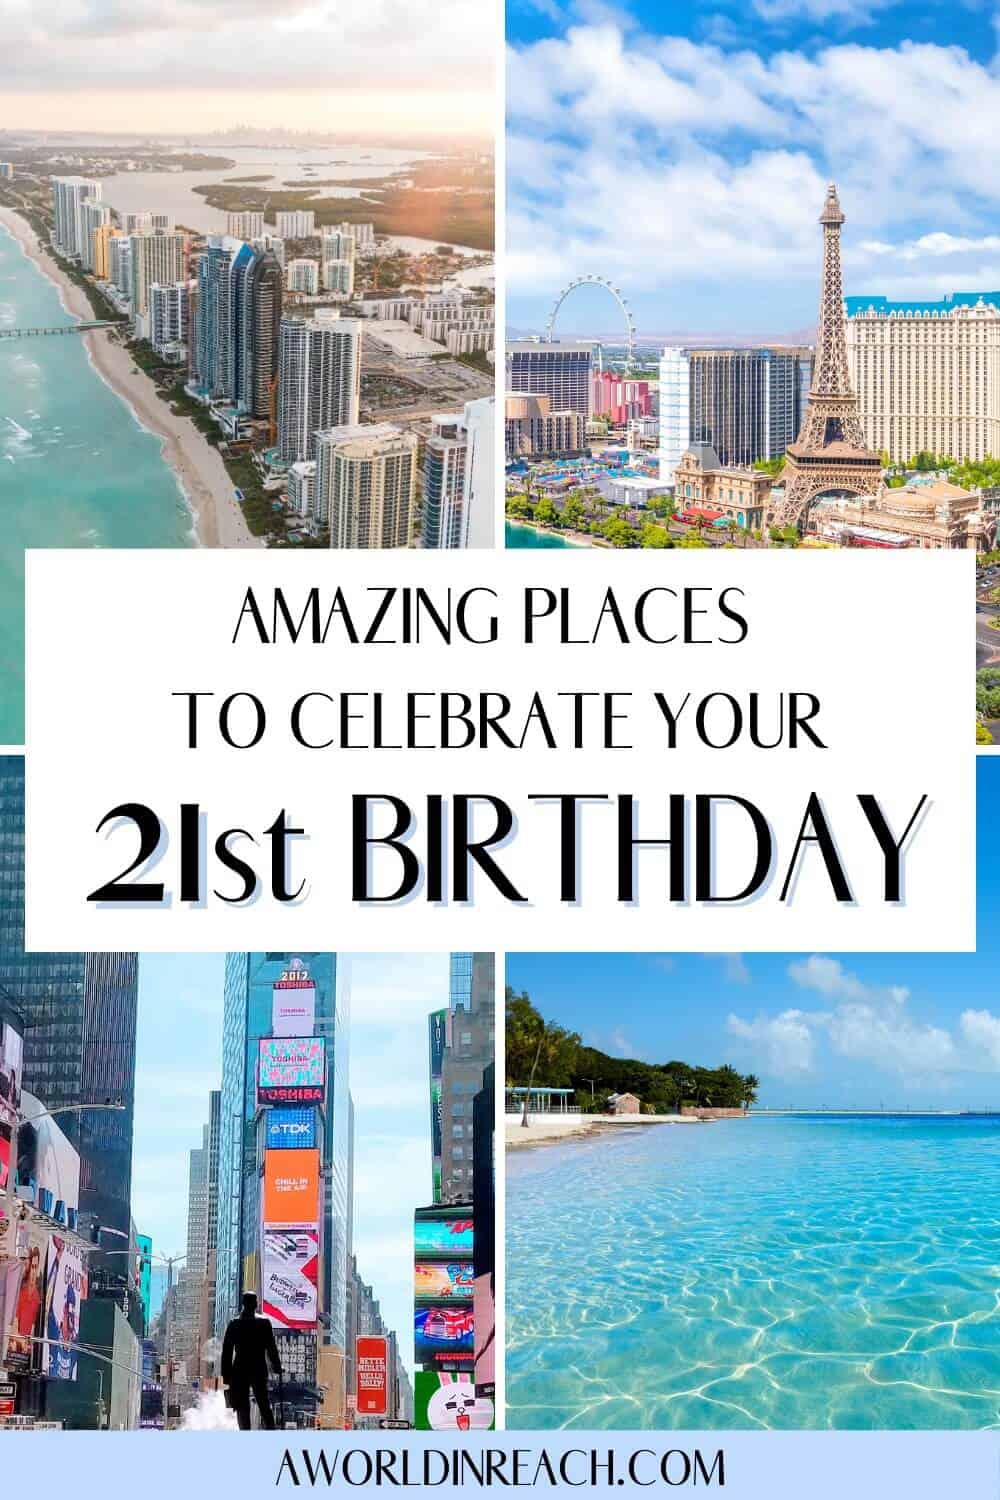 Amazing Places to Celebrate Your 21st Birthday